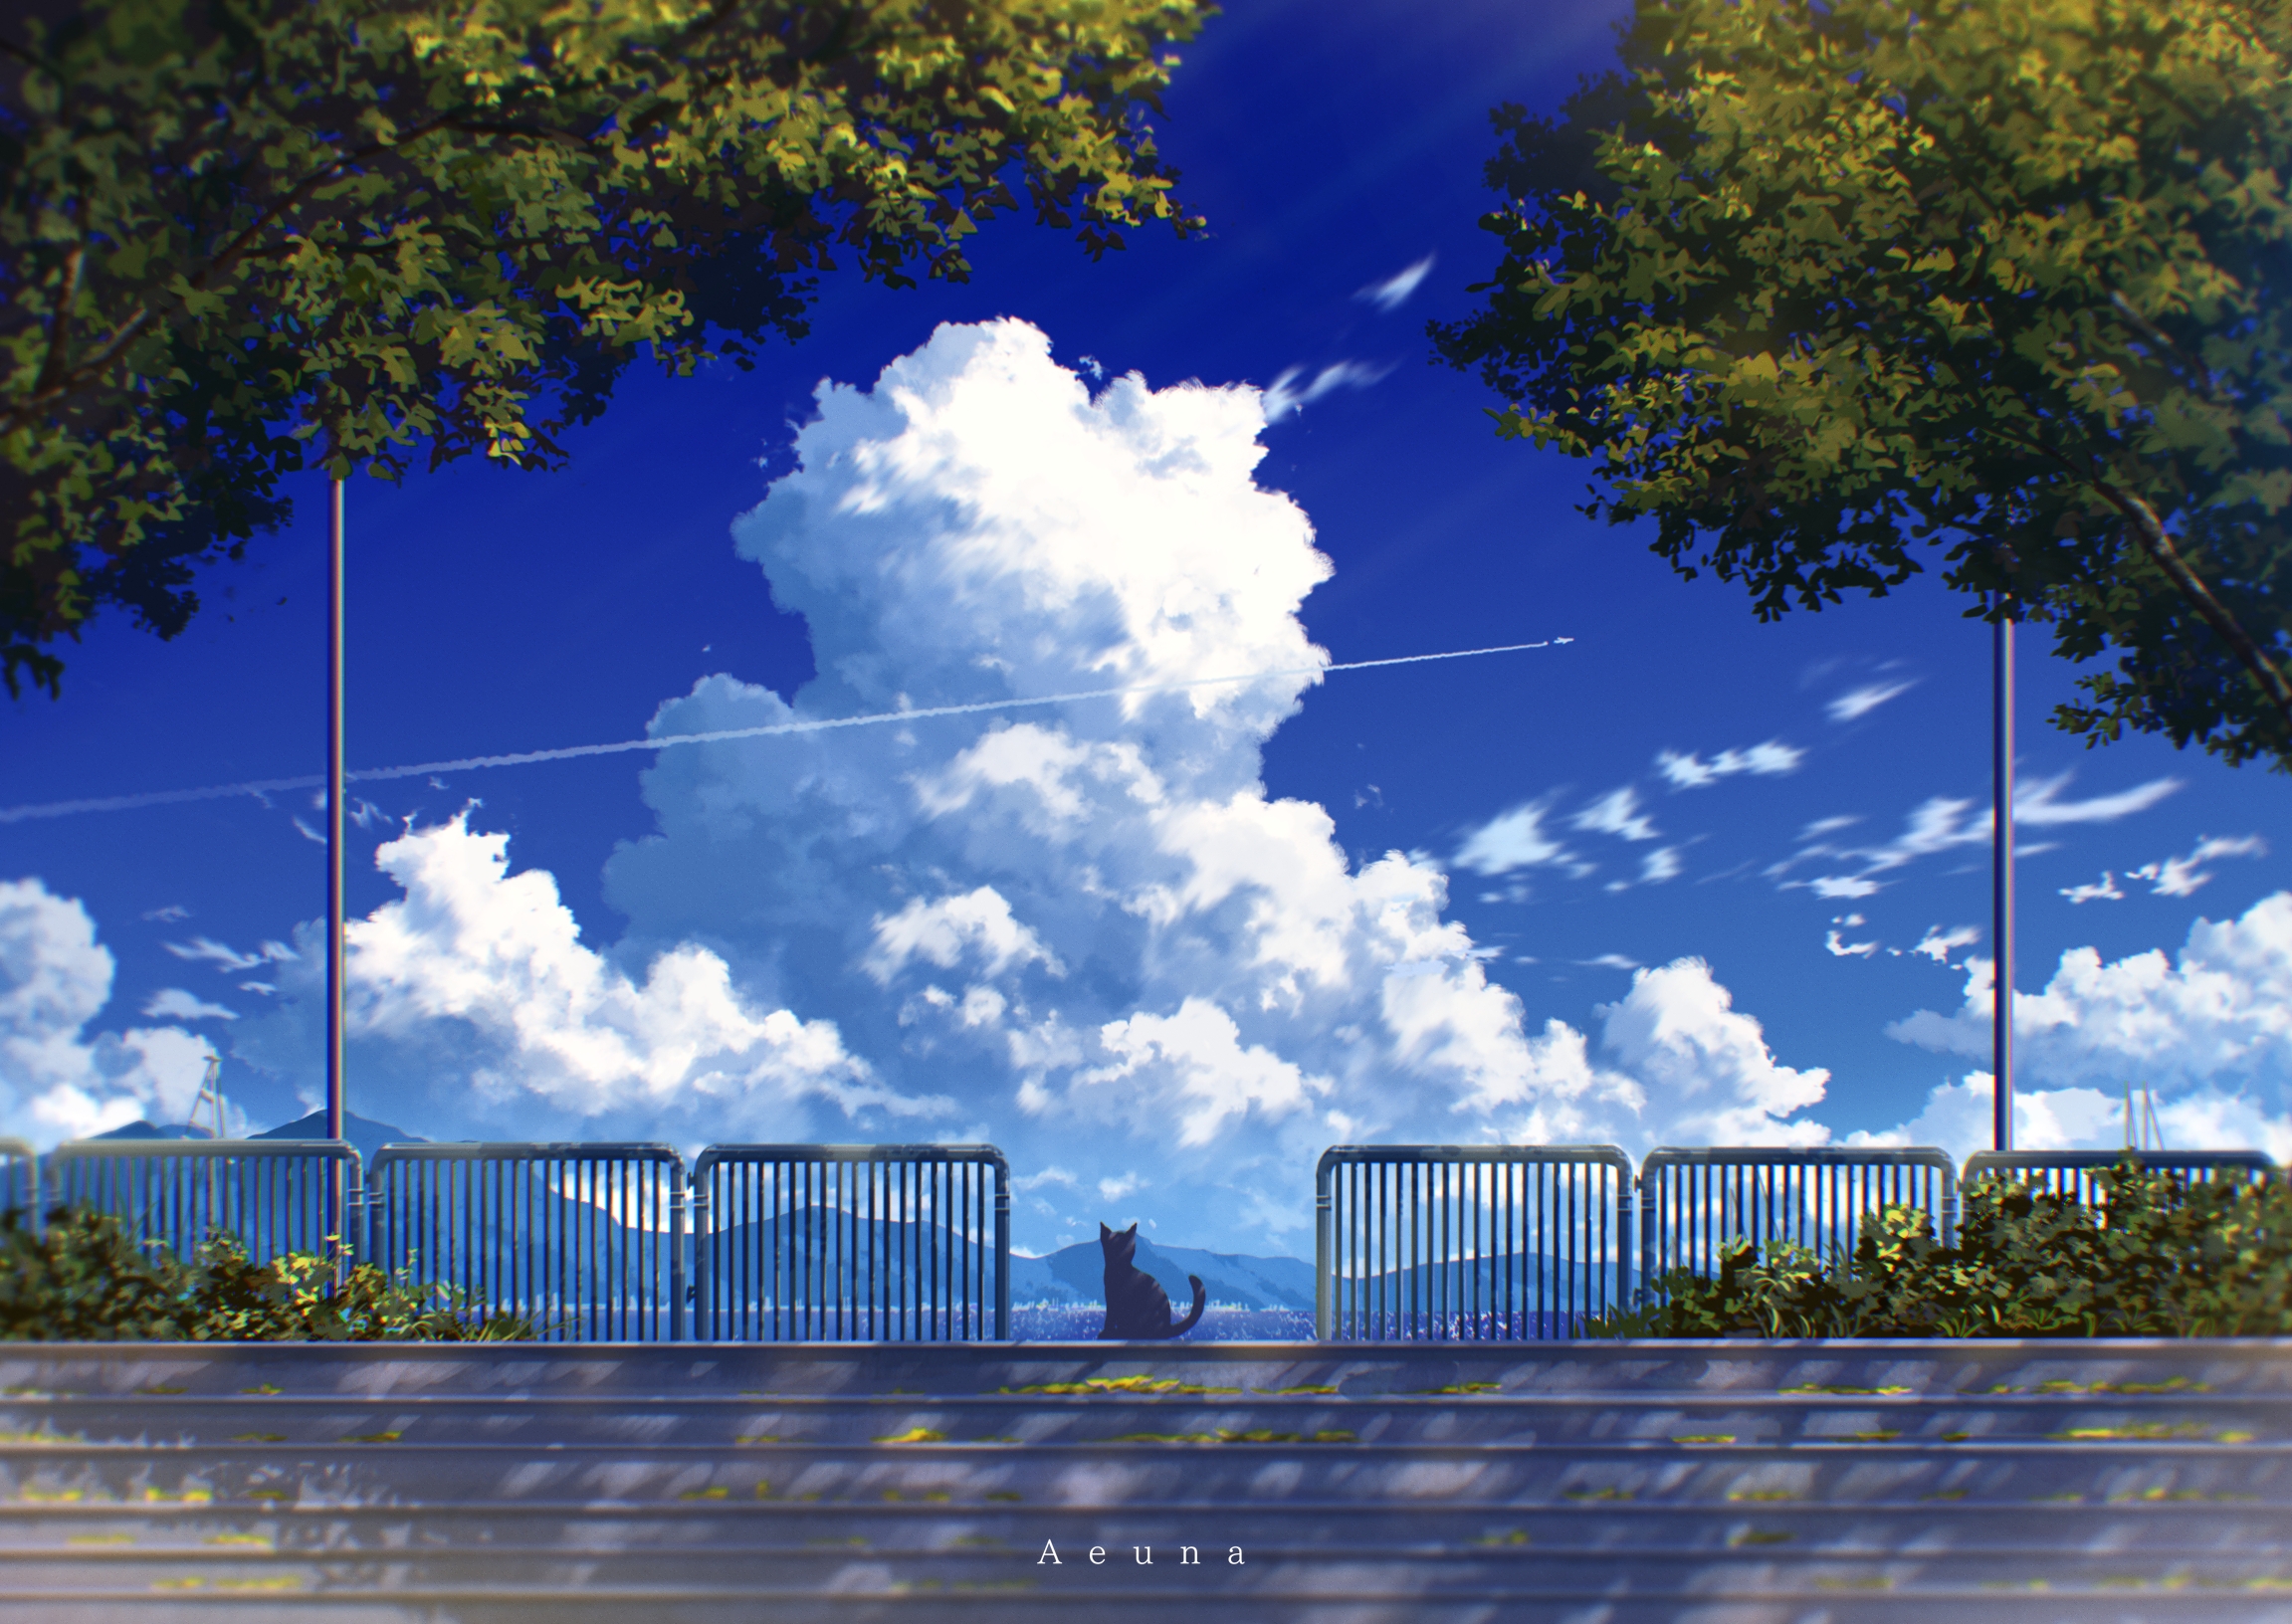 Anime Summer Scenery Wallpapers